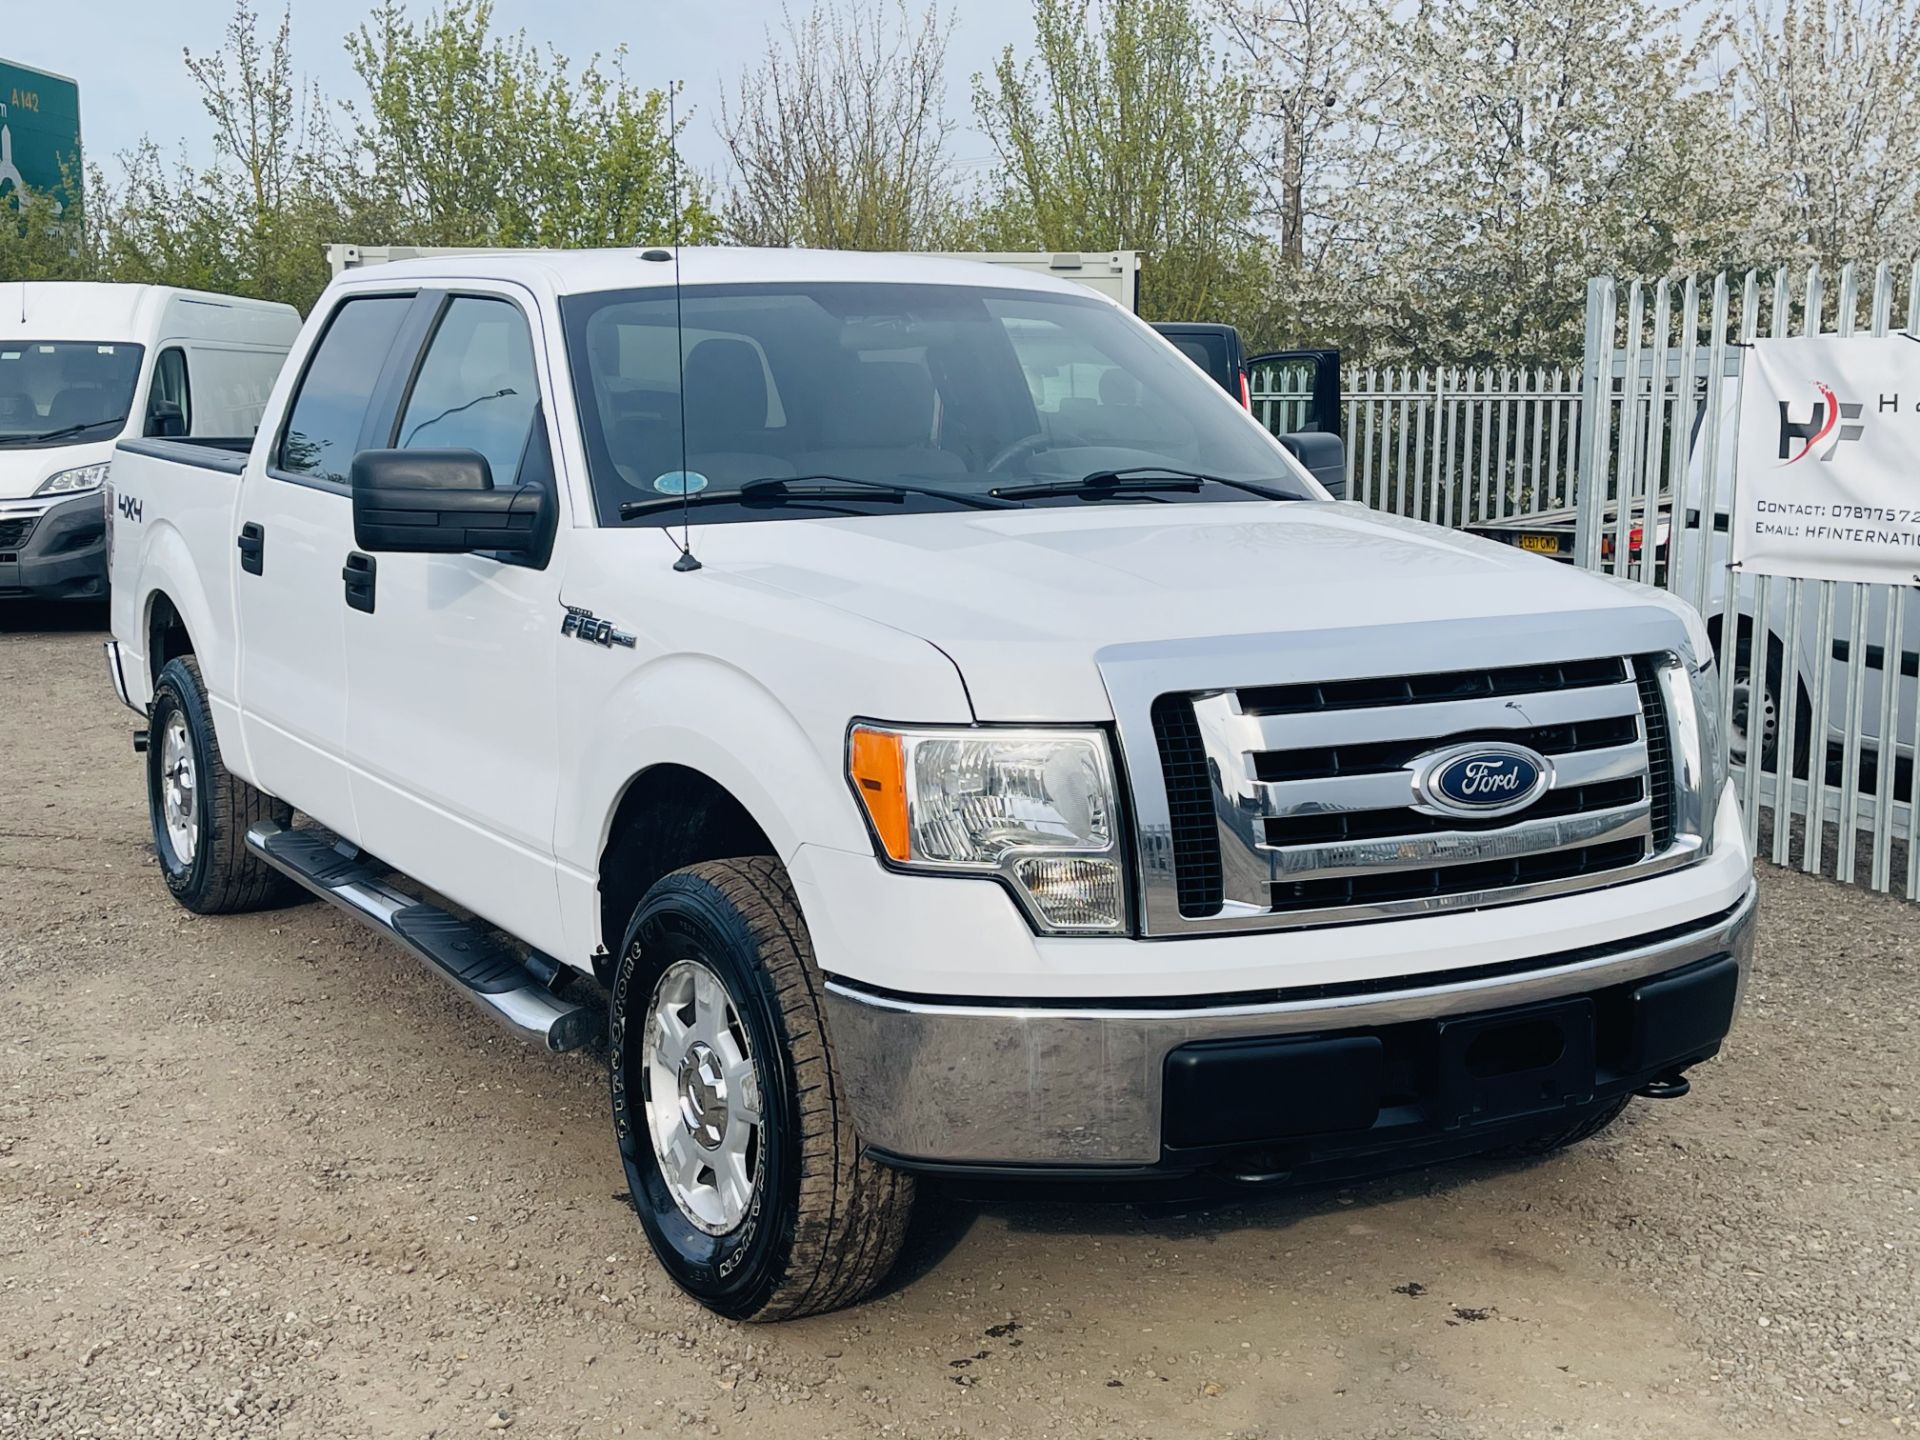 Ford F-150 XLT 4.6L V8 Super-crew 4WD 2010 ' 2010 Year' 6 Seats - Air con - NO RESERVE - Image 2 of 24